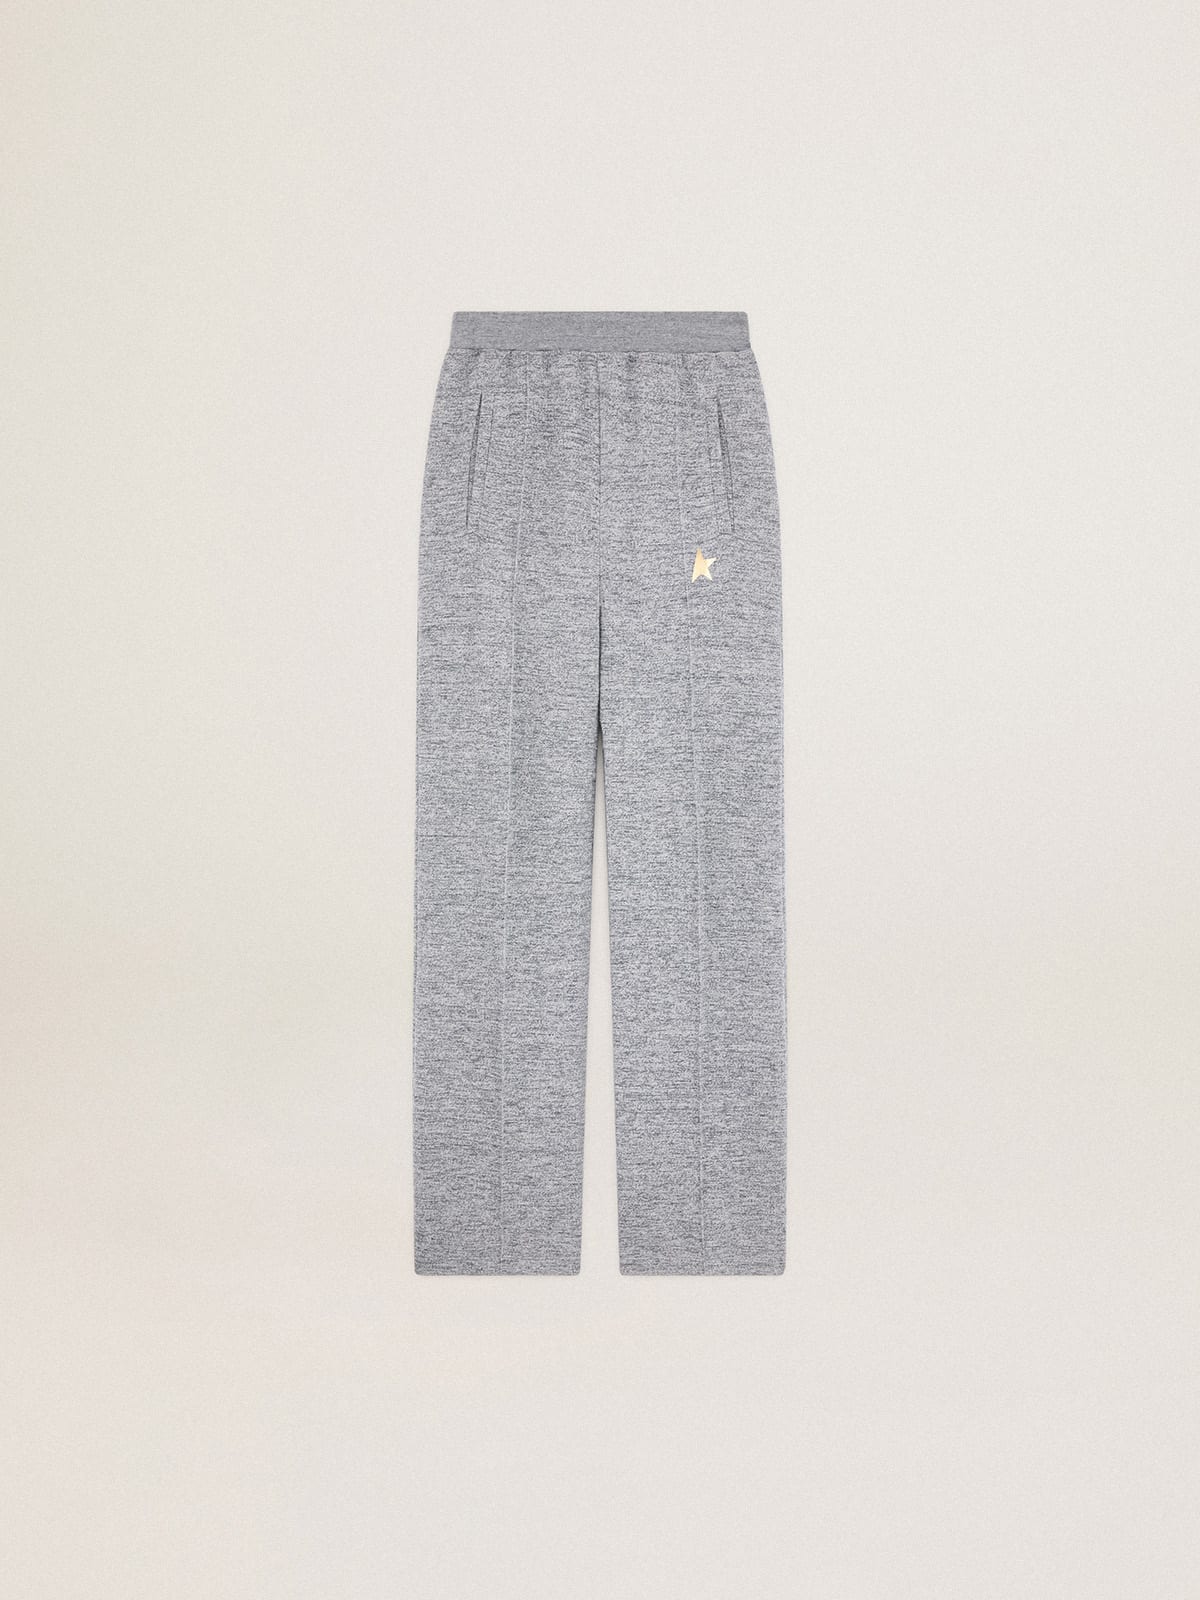 Gray joggers with gold star on the front